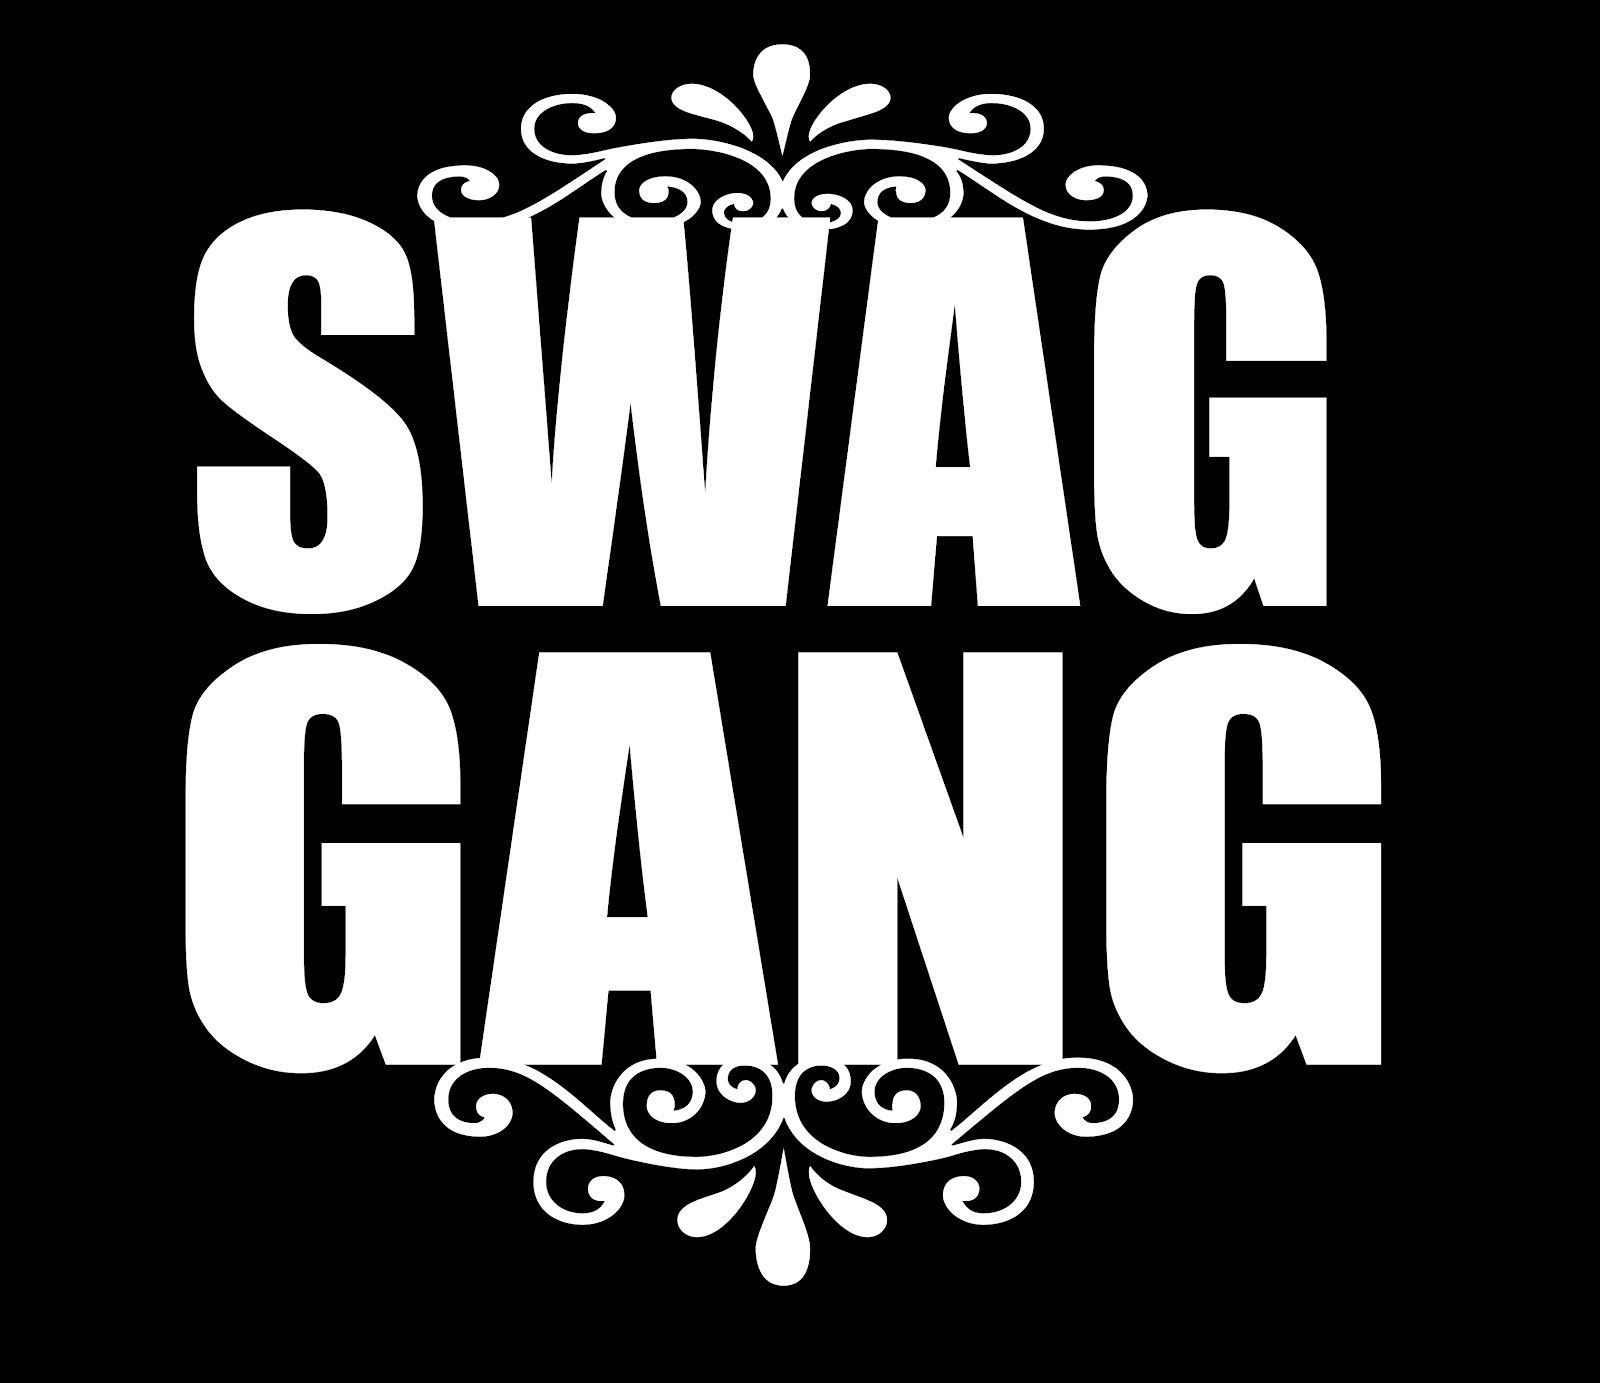 SWAG pictures, photos and SWAG style wallpapers